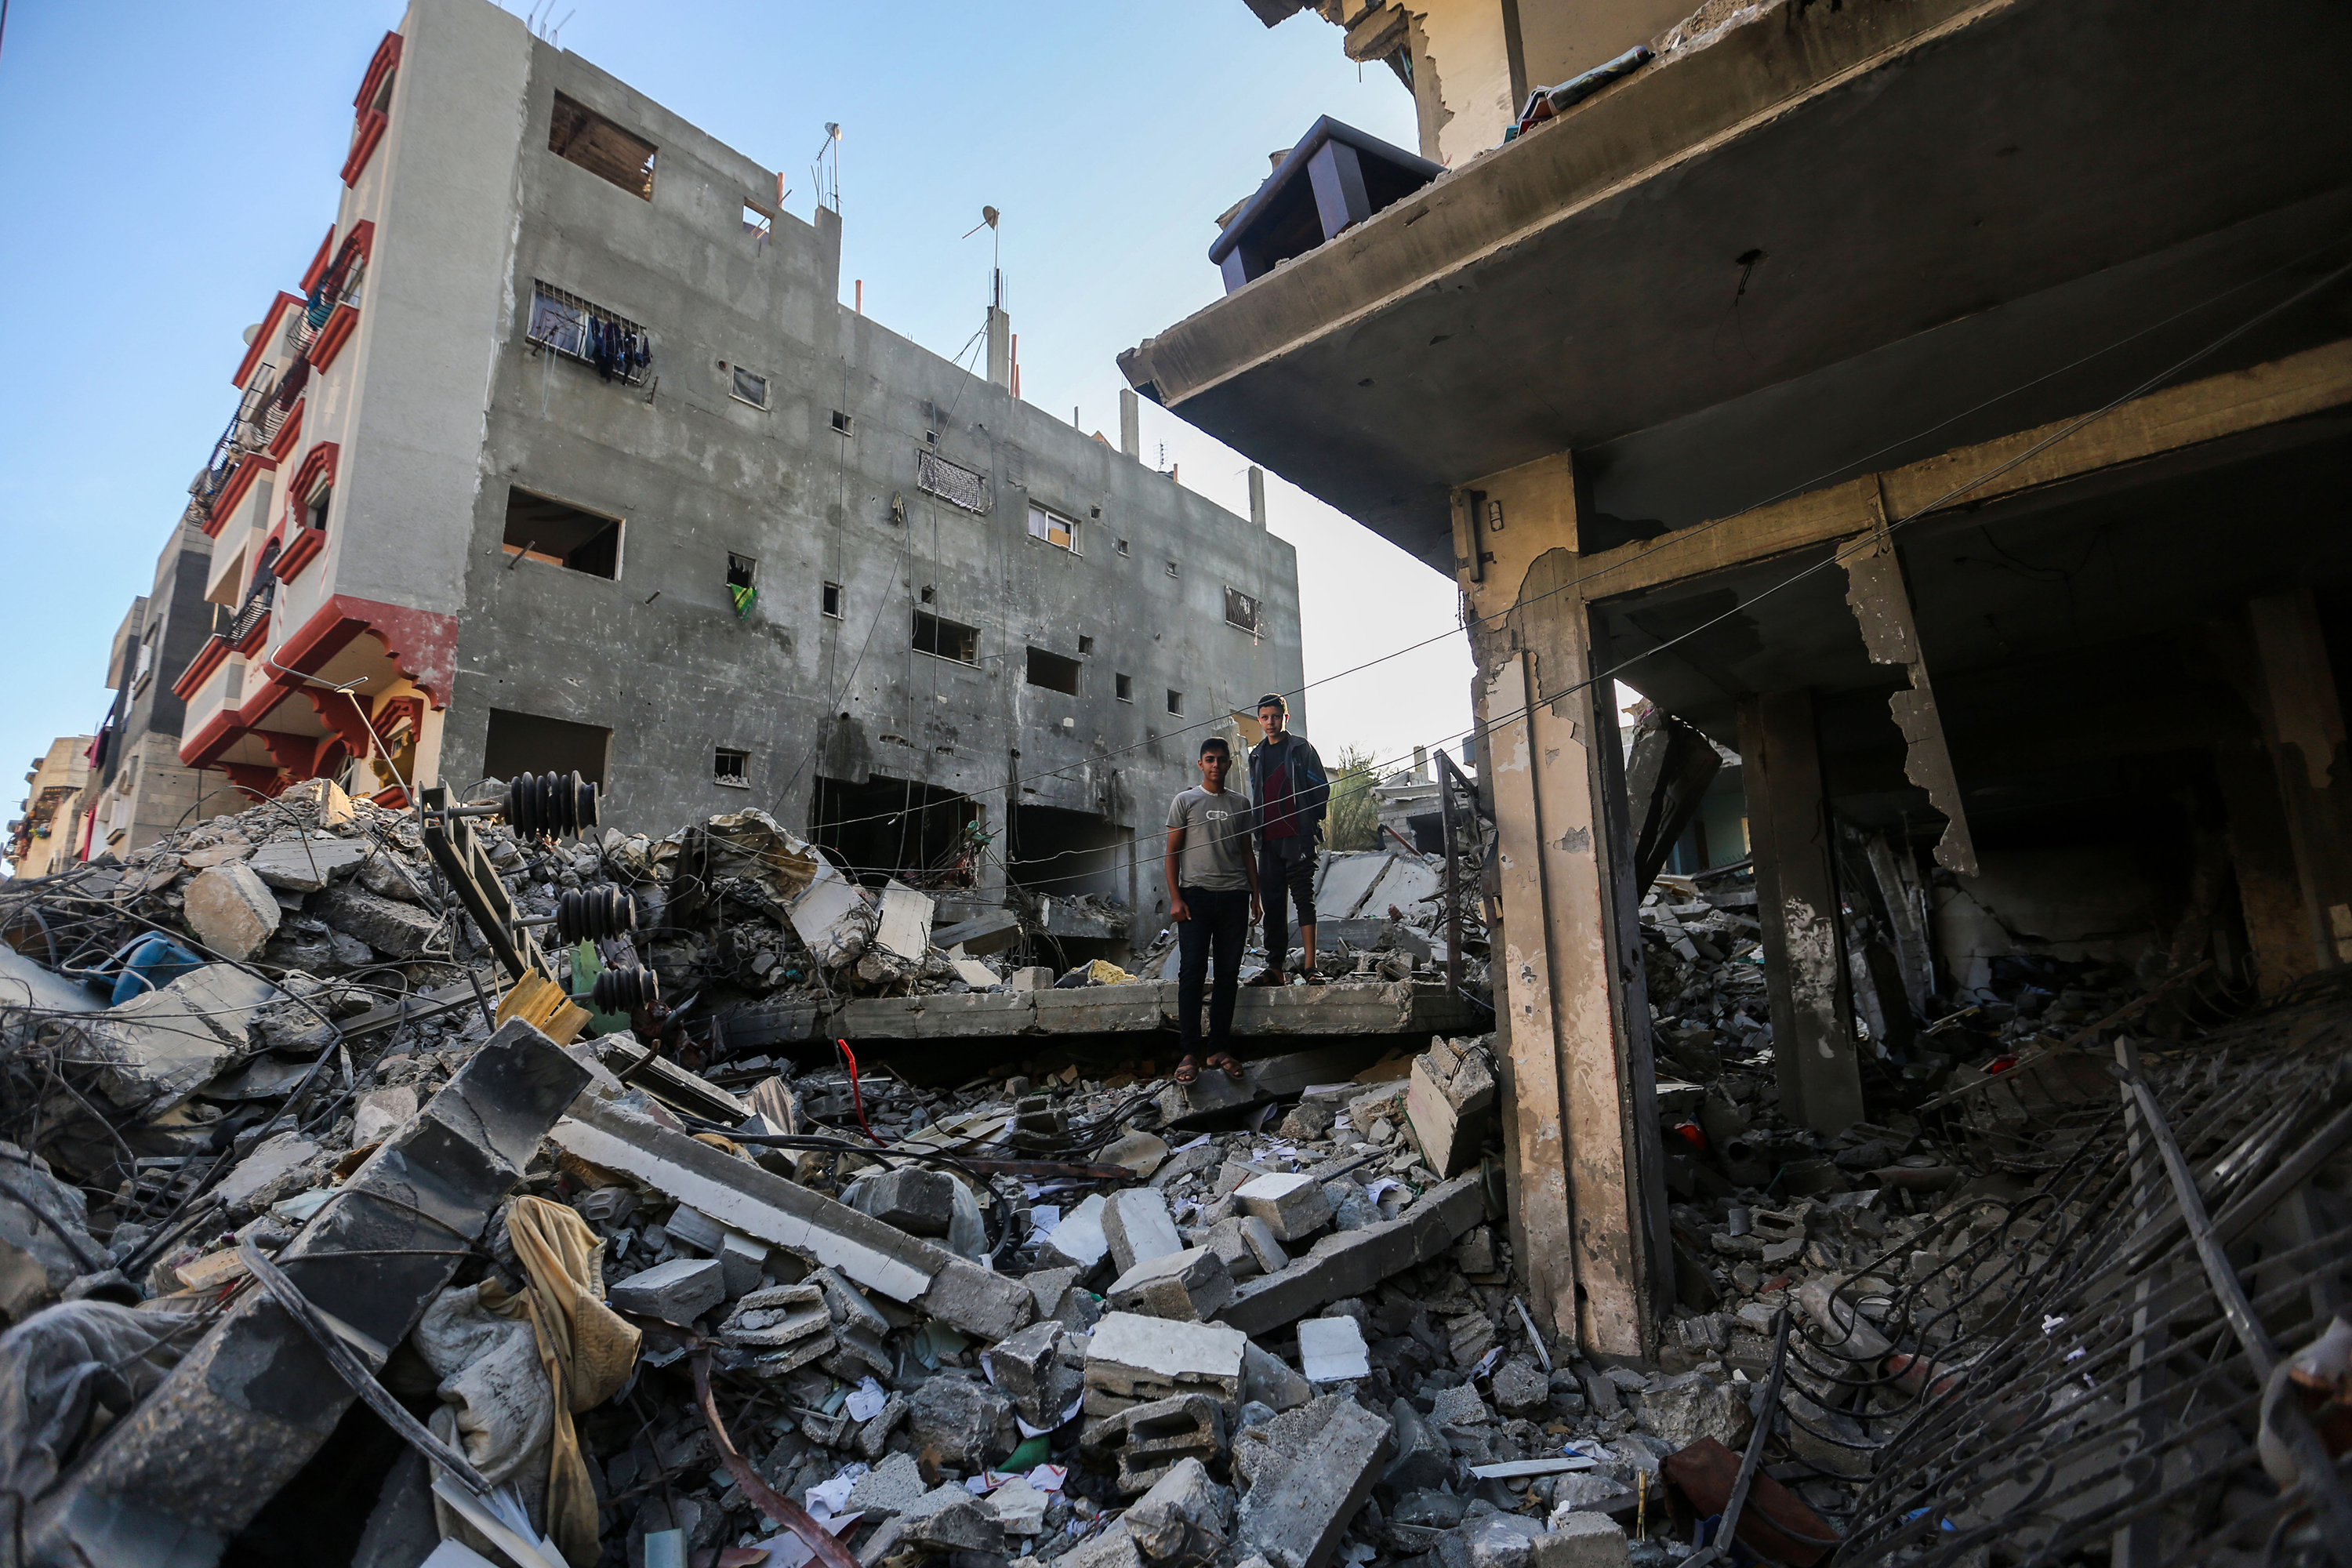 People search through destroyed buildings during Israeli air raids in the southern Gaza Strip on November 10, in Khan Yunis, Gaza.